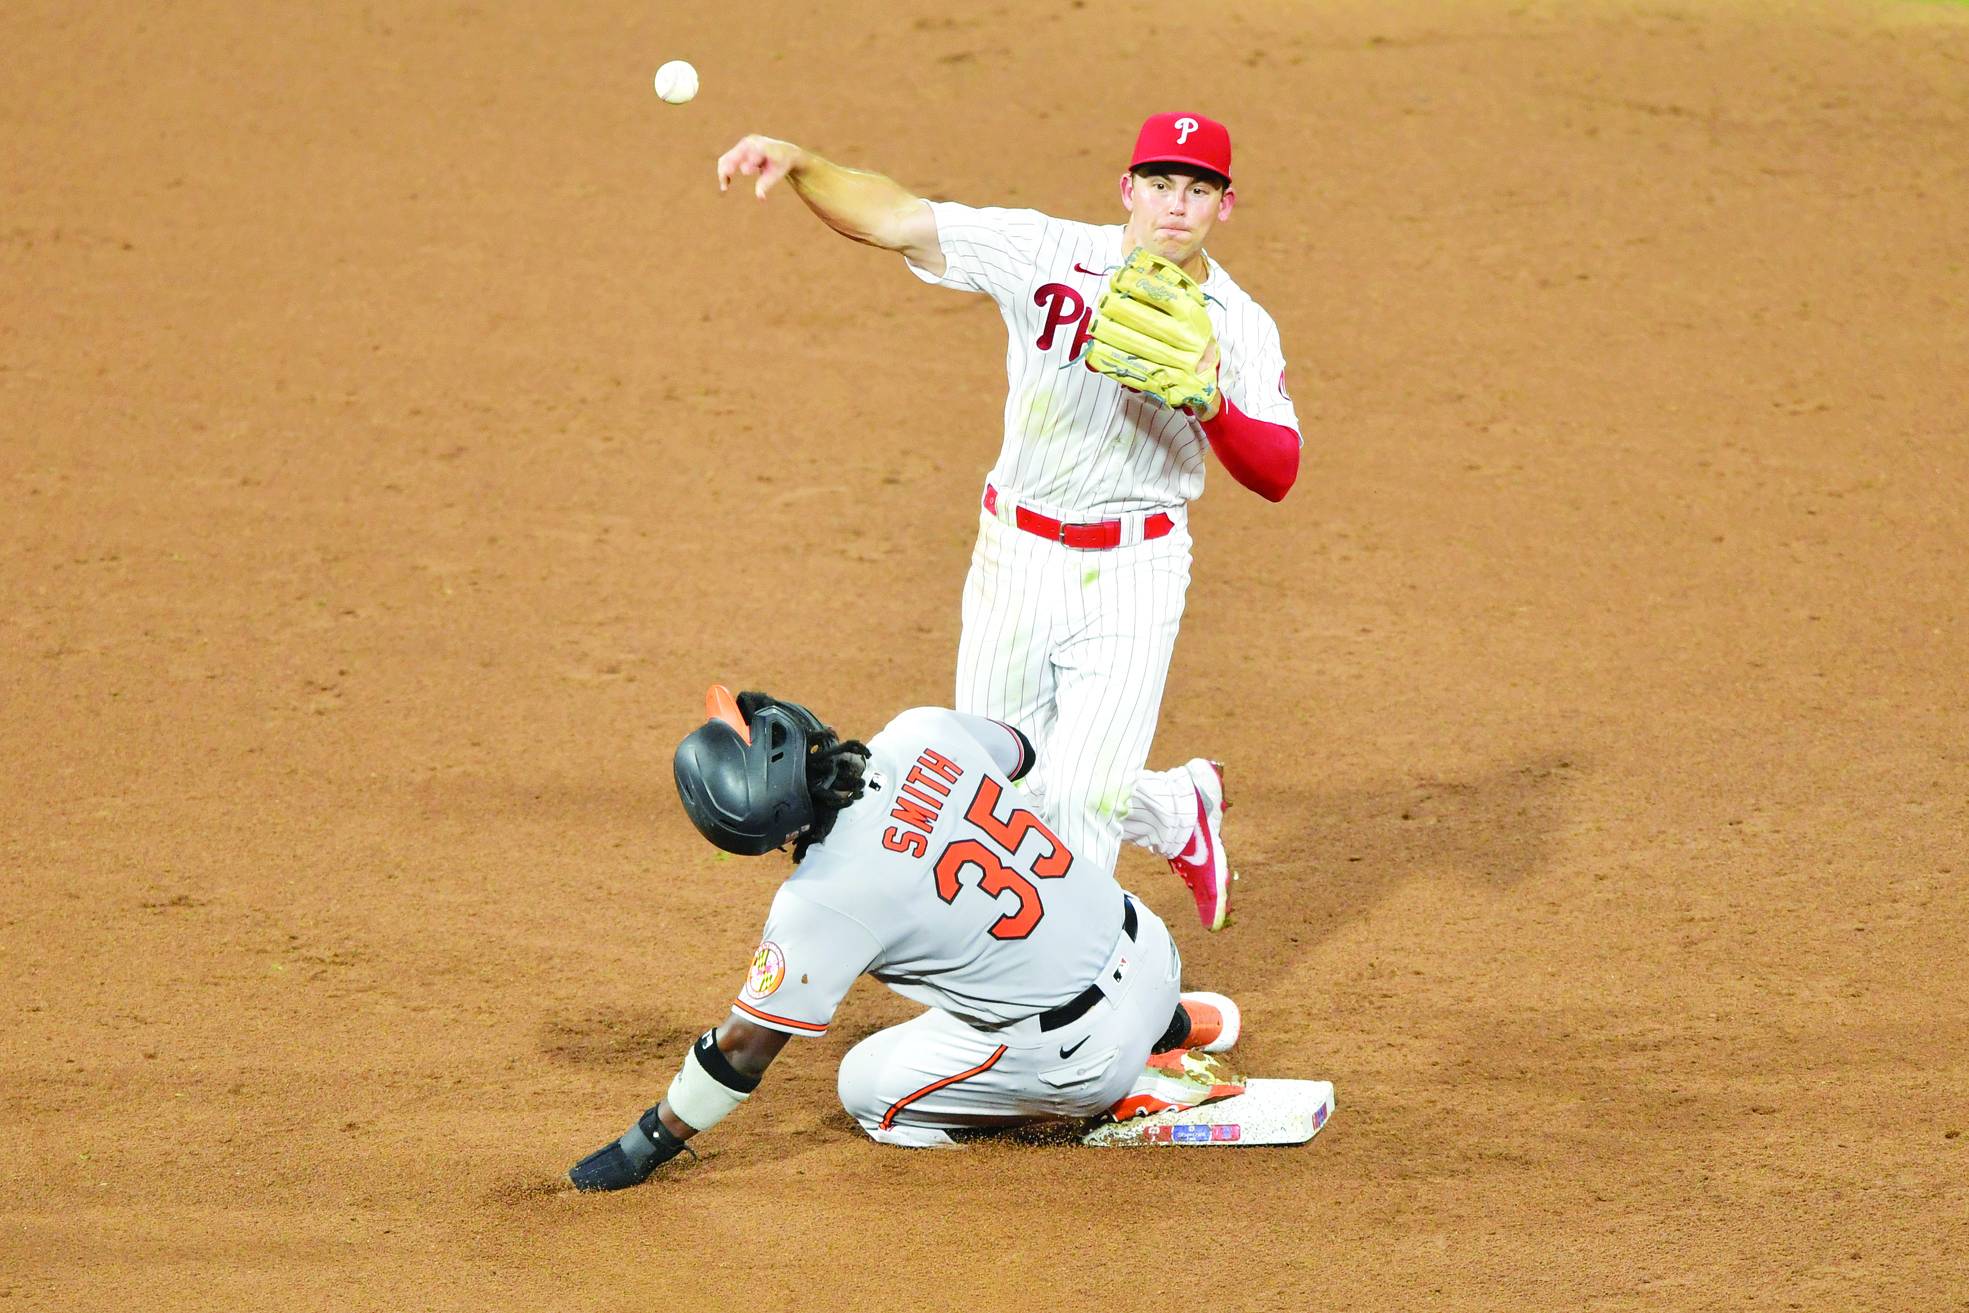 PHILADELPHIA, PA - AUGUST 11: Scott Kingery #4 of the Philadelphia Phillies forces out Dwight Smith Jr. #35 of the Baltimore Orioles at second base on an attempted double play in the sixth inning at Citizens Bank Park on August 11, 2020 in Philadelphia, Pennsylvania.   Drew Hallowell/Getty Images/AFP